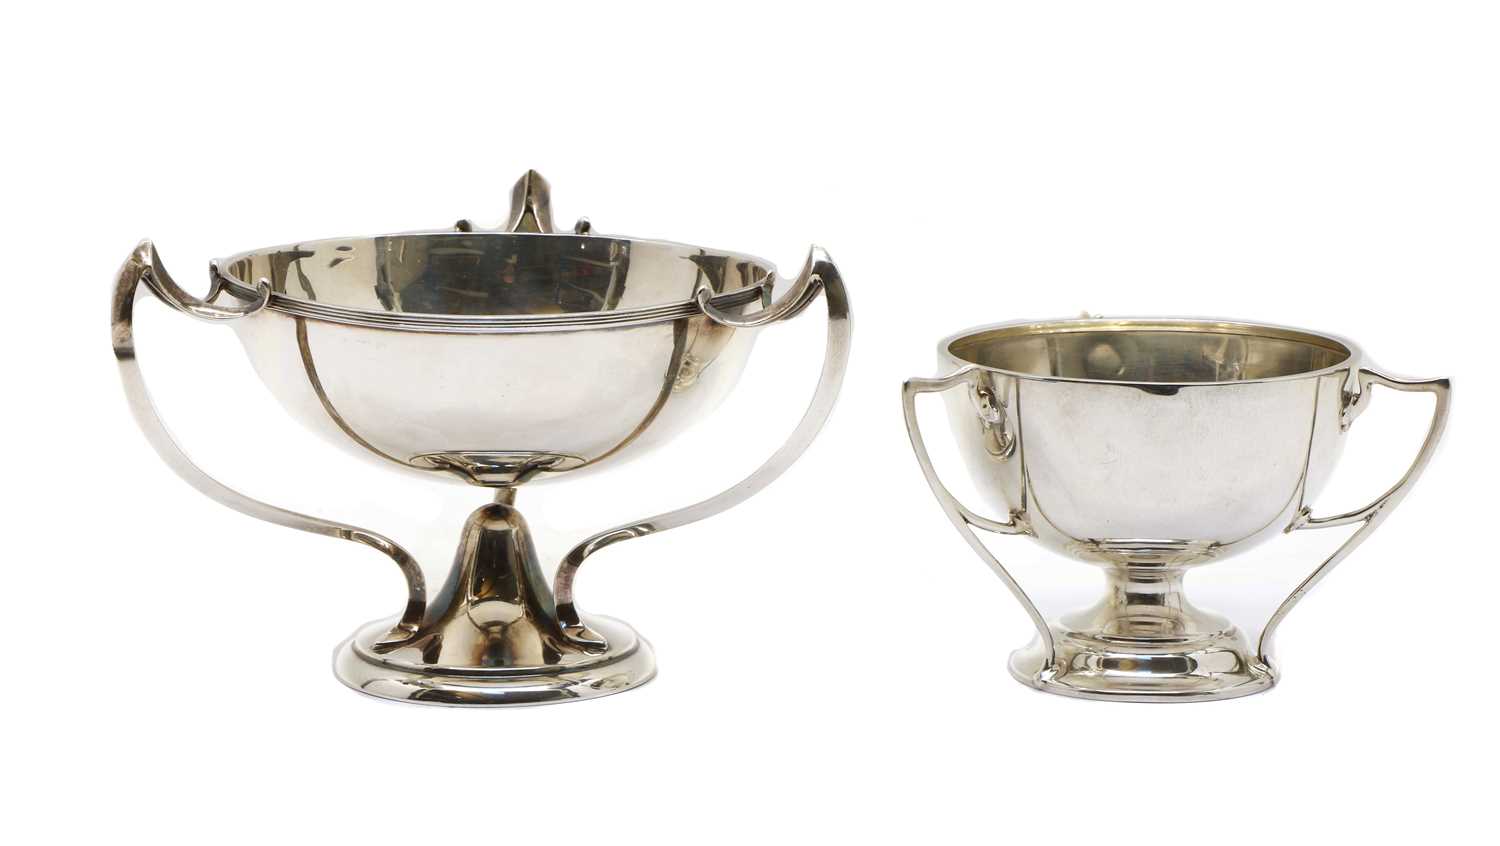 Lot 54 - An arts and crafts three handled silver bowl